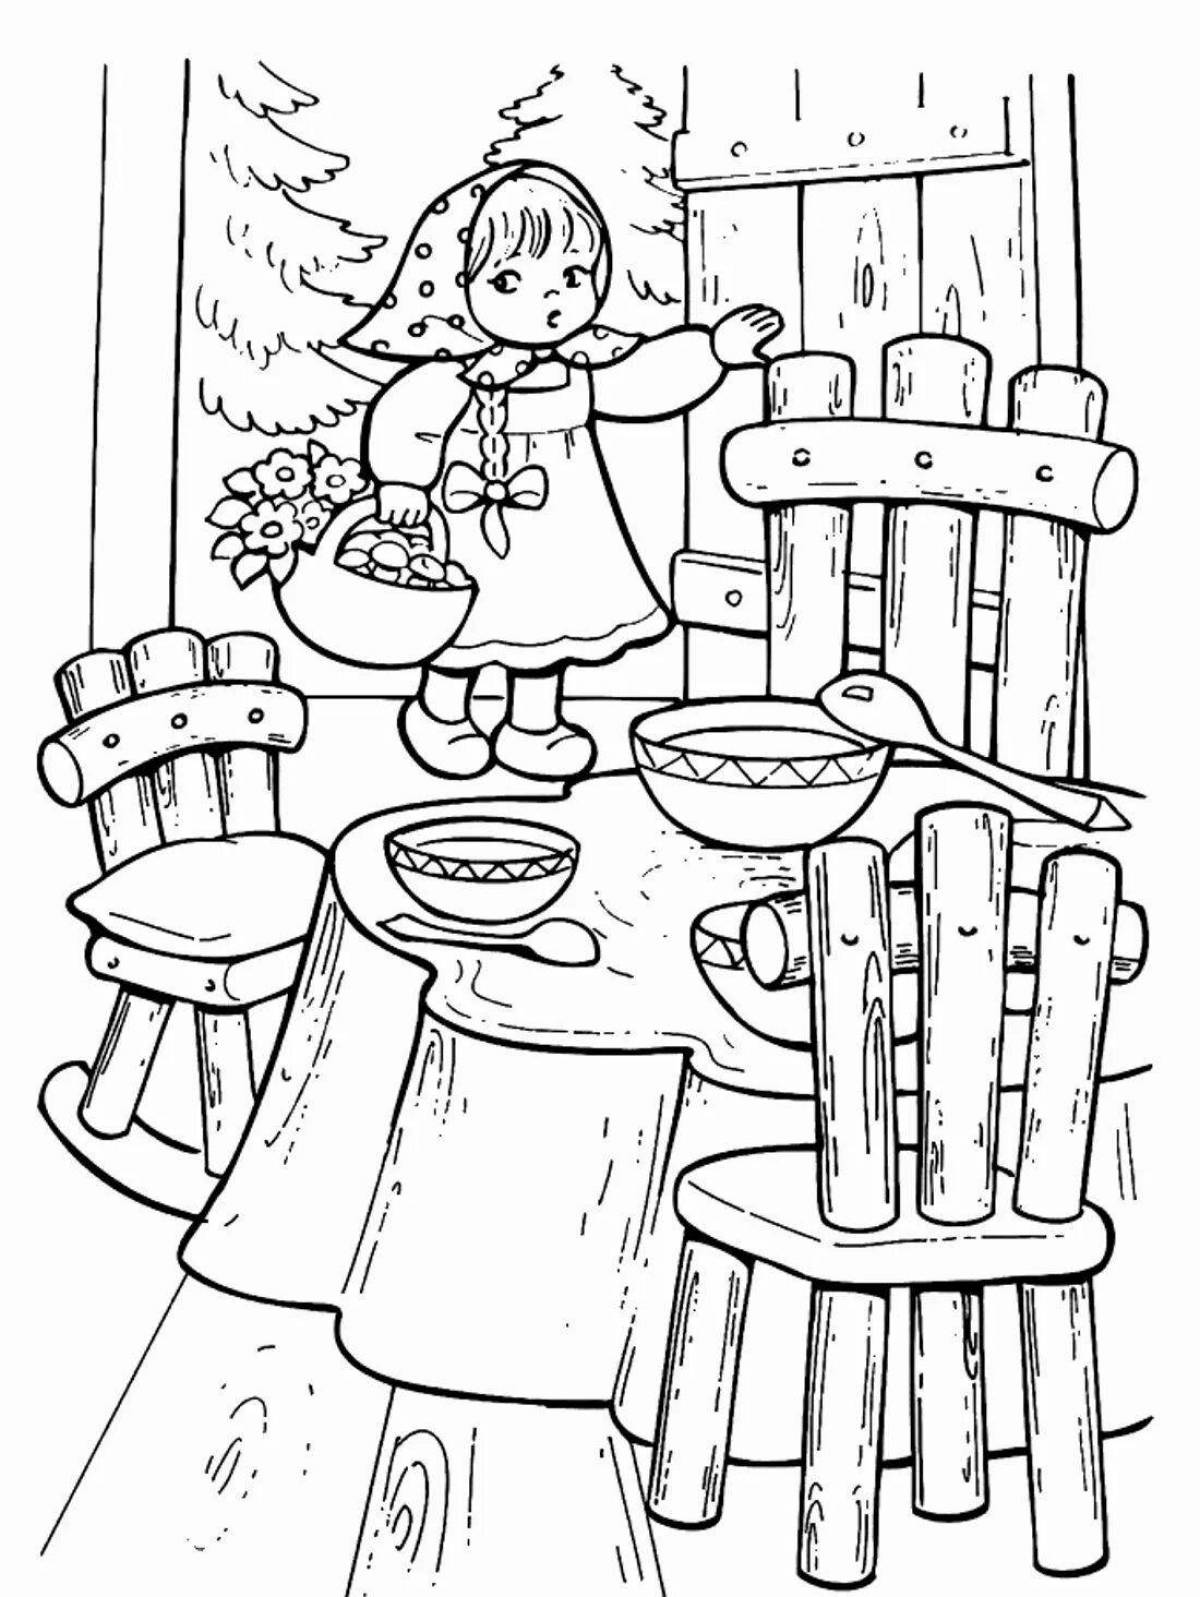 3 bears coloring pages for babies